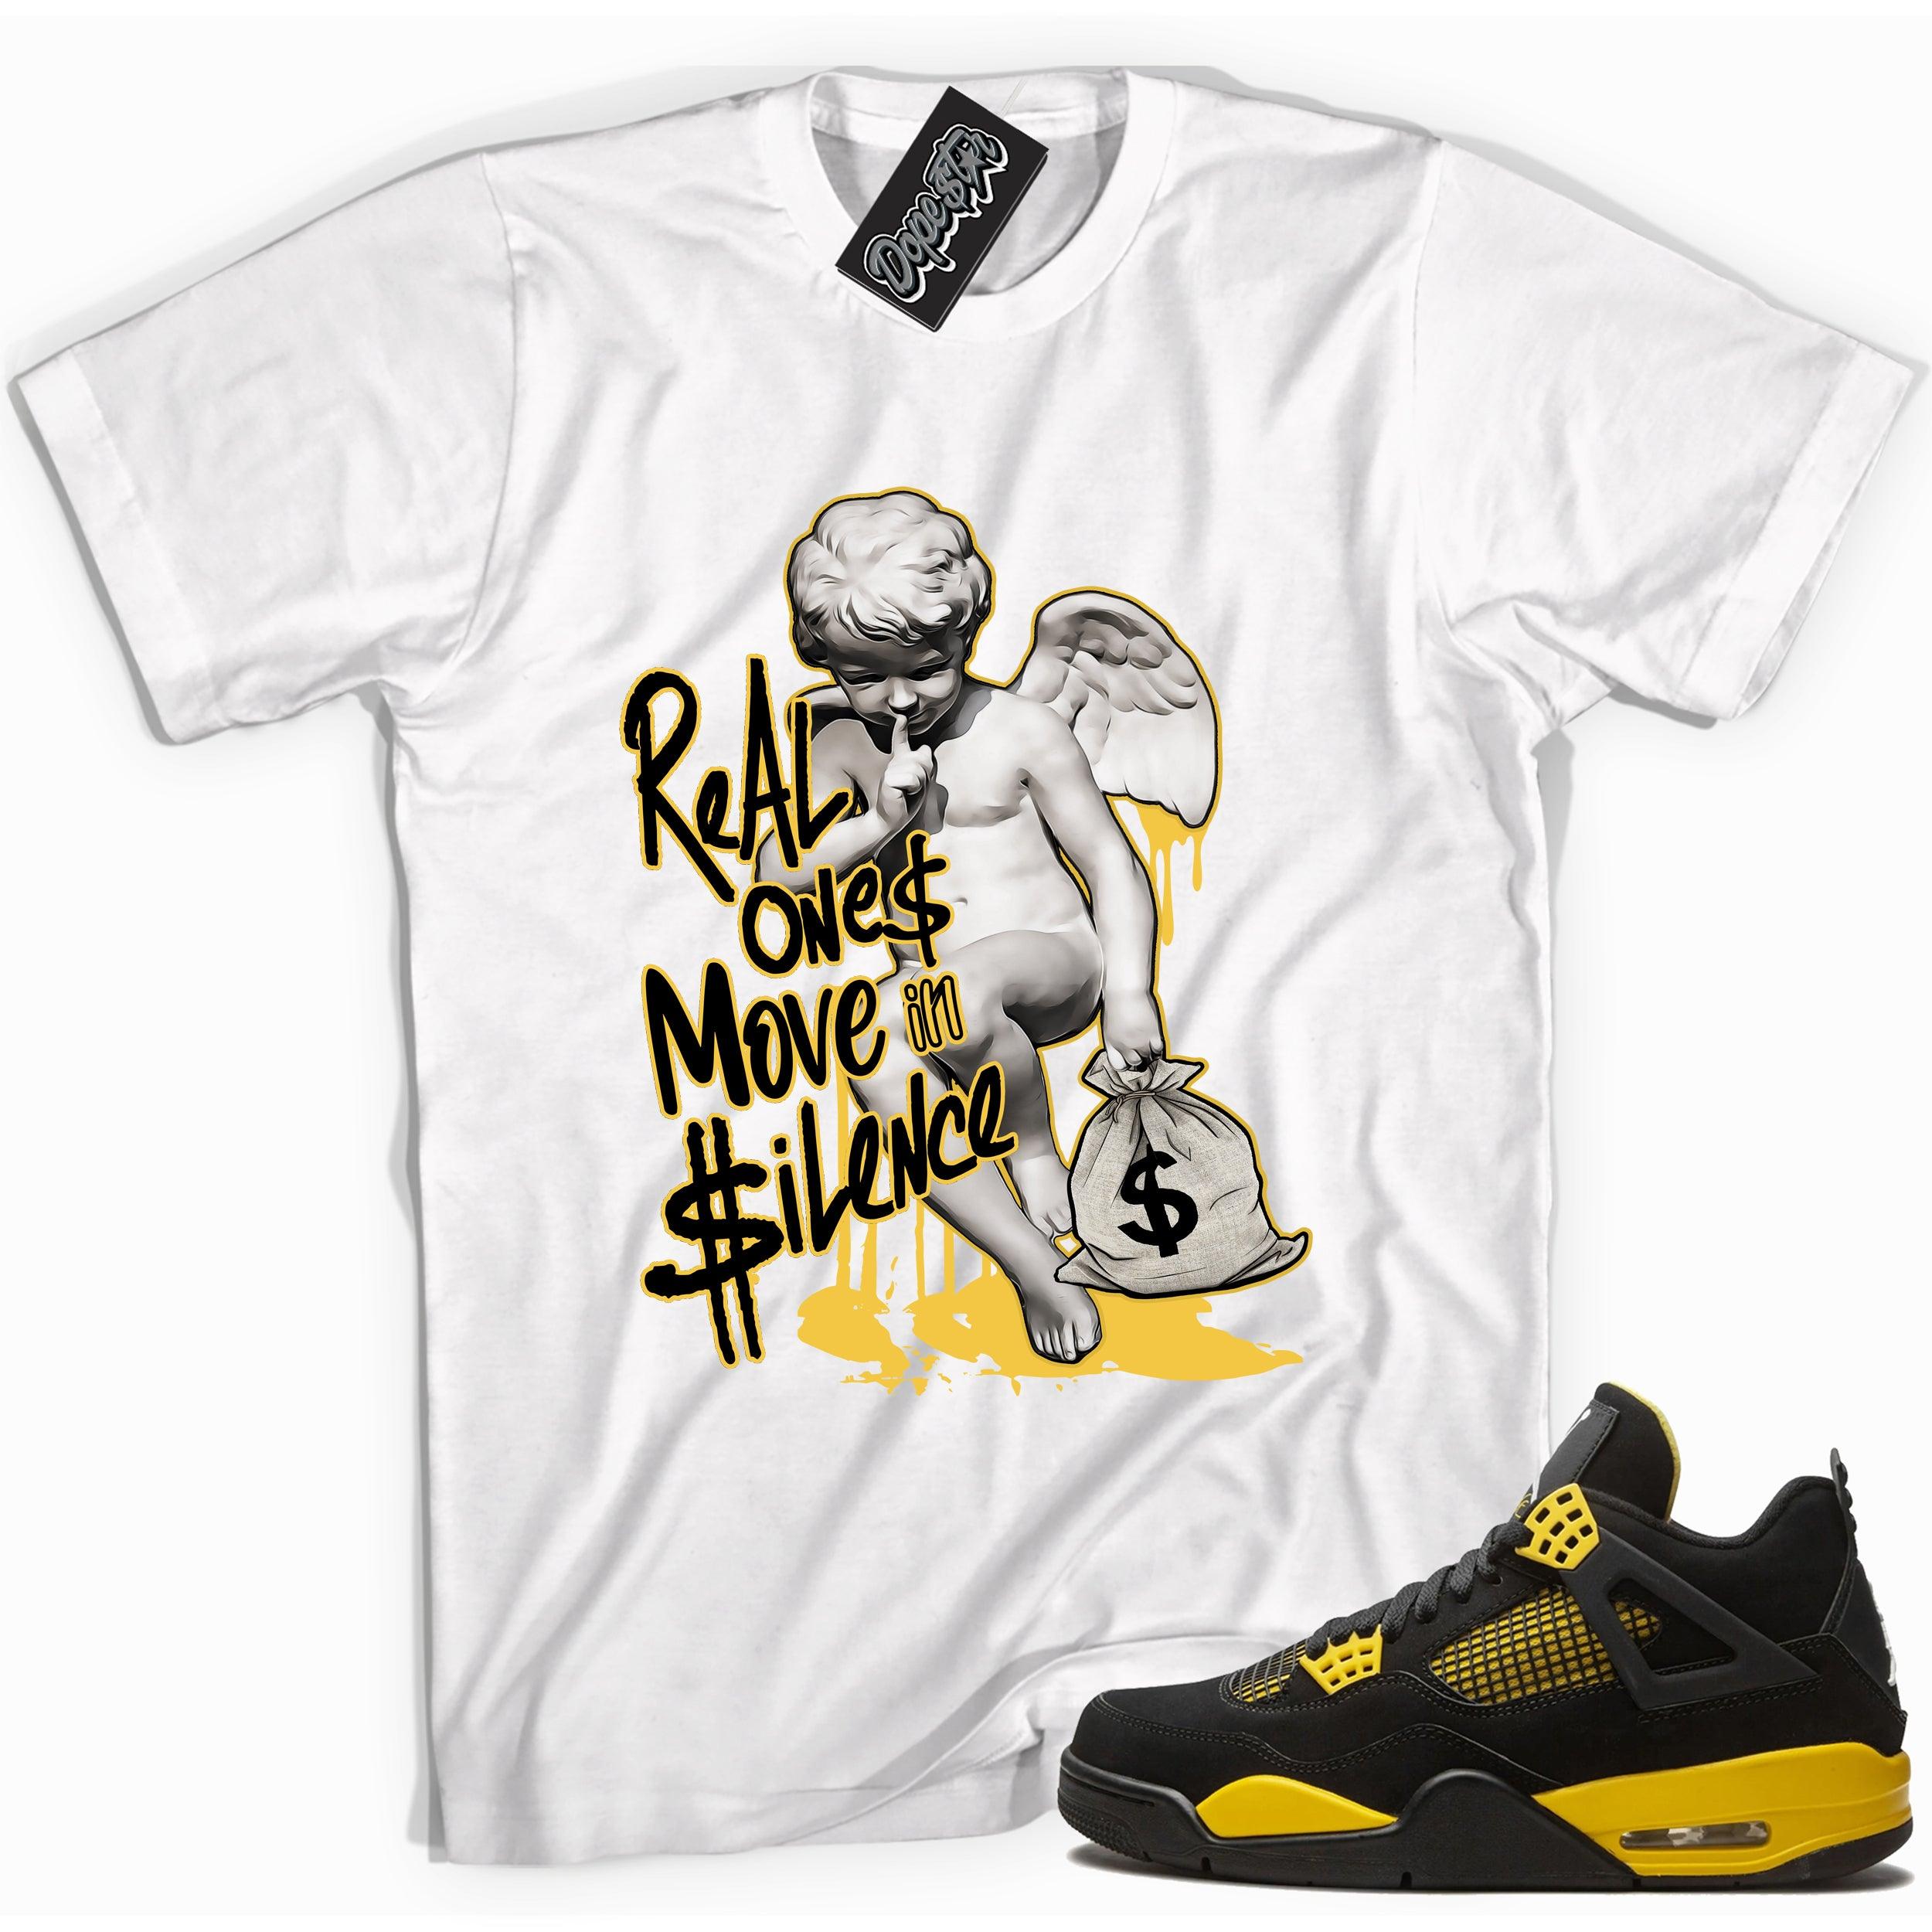 Cool white graphic tee with 'real ones move in silence' print, that perfectly matches Air Jordan 4 Thunder sneakers